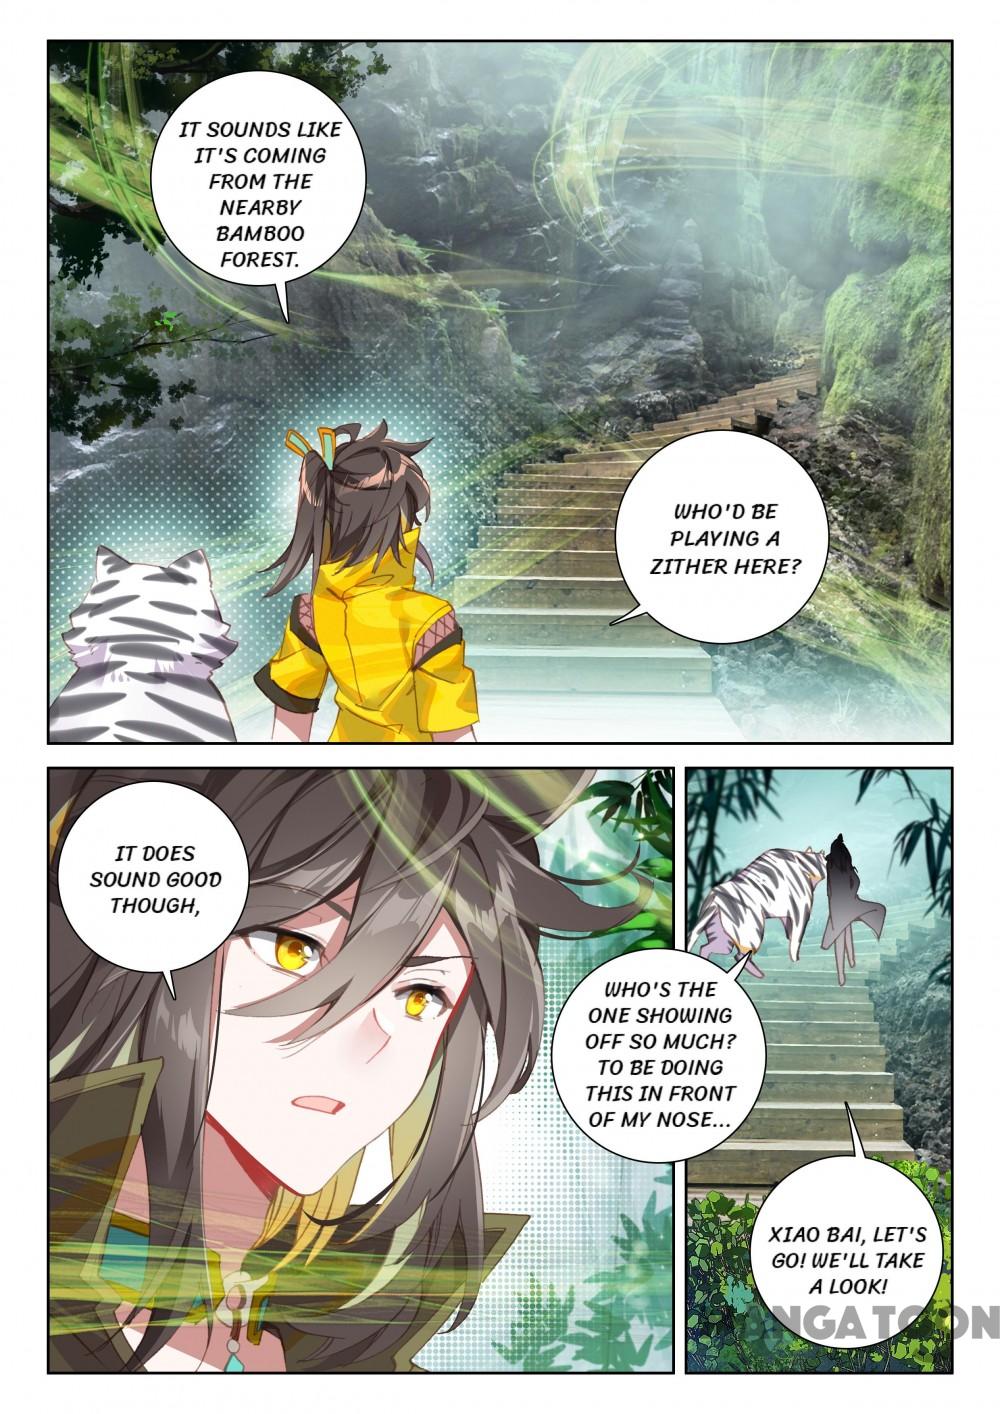 The Great Deity - Page 2